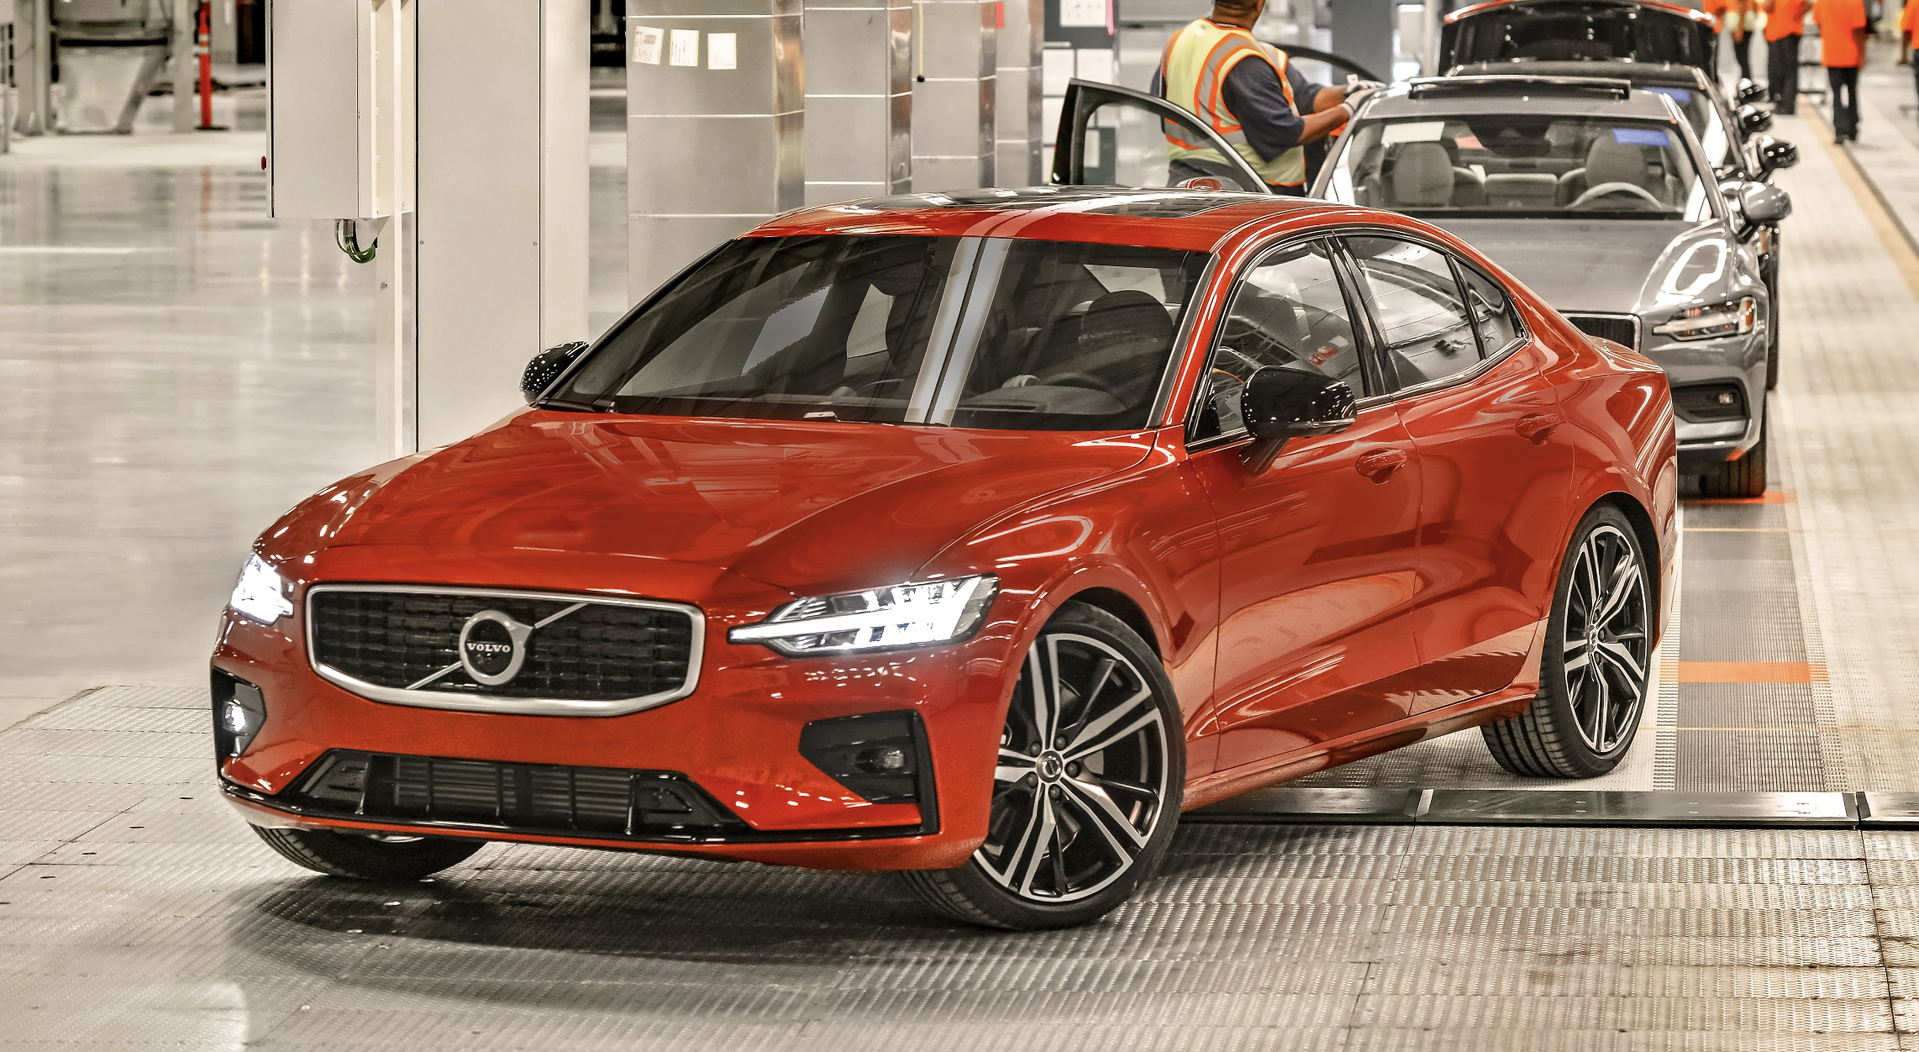 Volvo launch the new S60